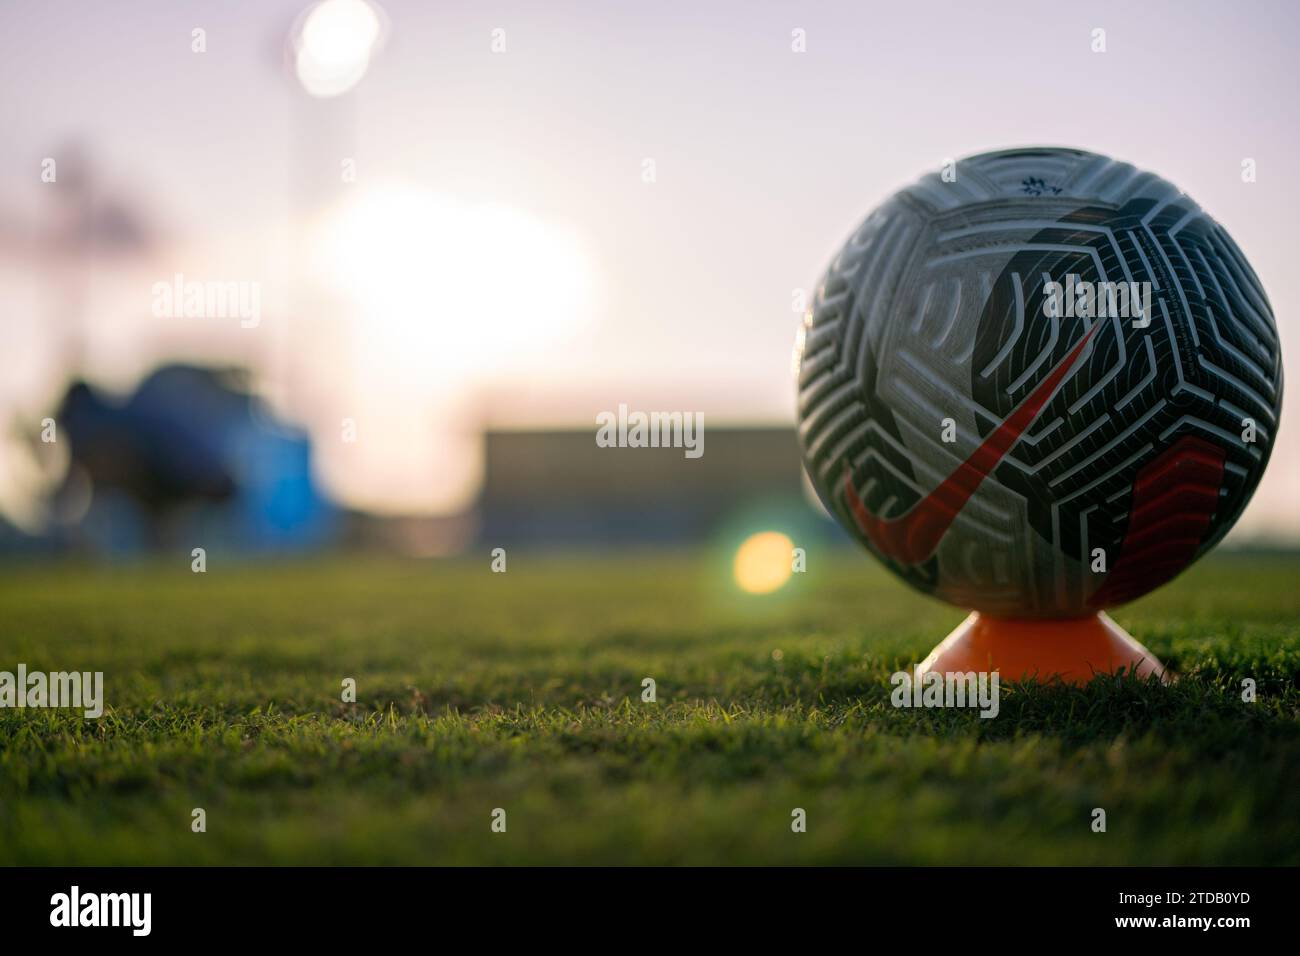 A soccer ball rest on the pitch before a match while players are running pre match warmups Stock Photo